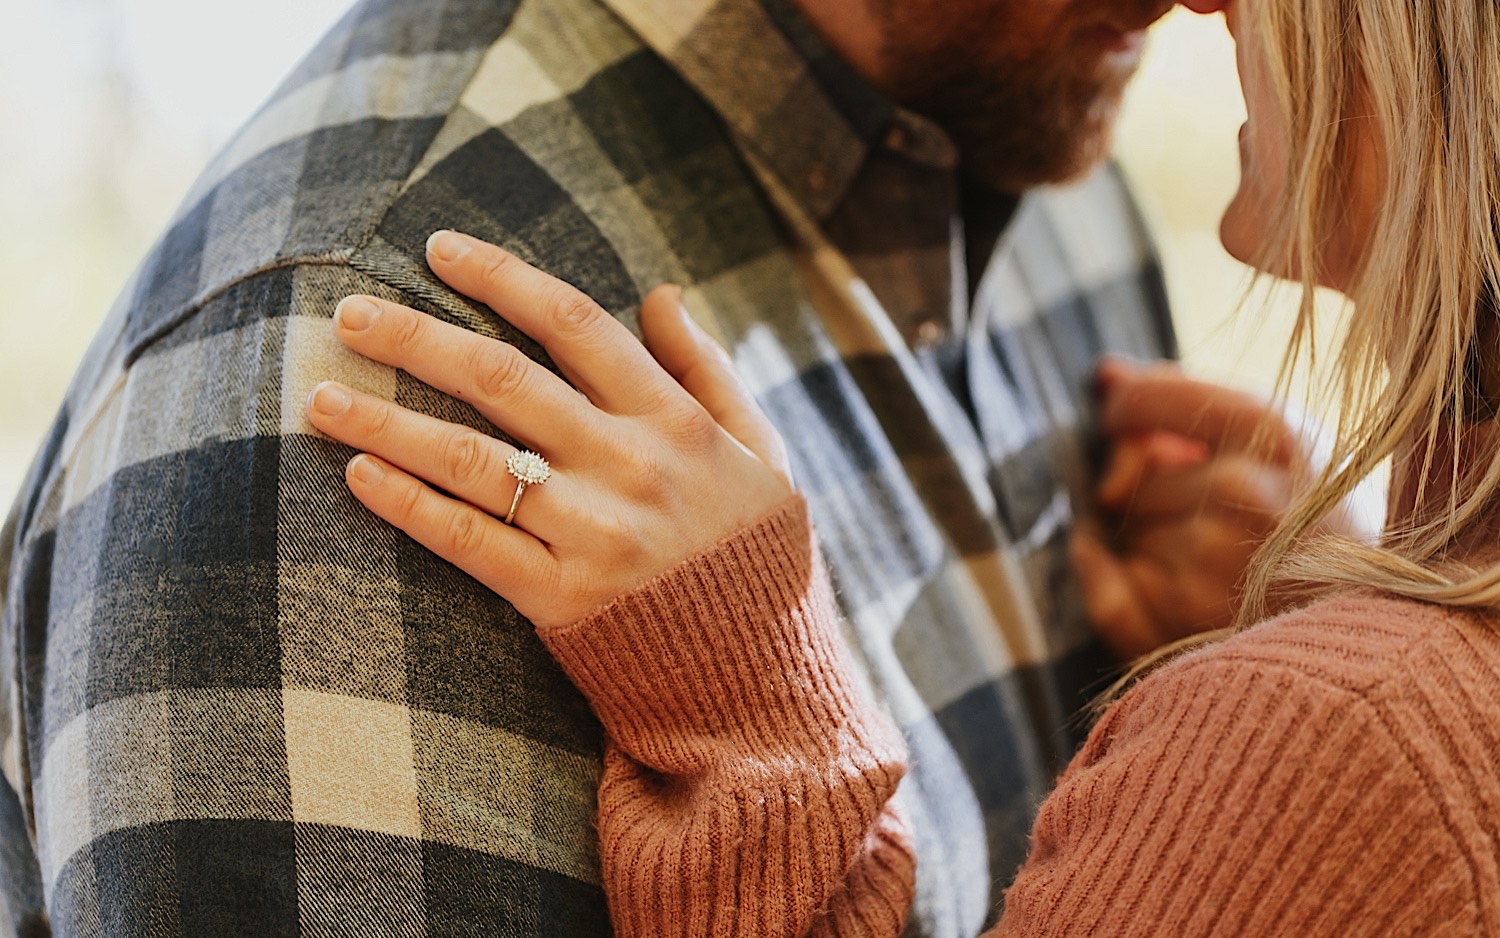 Close up photo of a woman's hand on a man's shoulder showing off the engagement ring on her finger